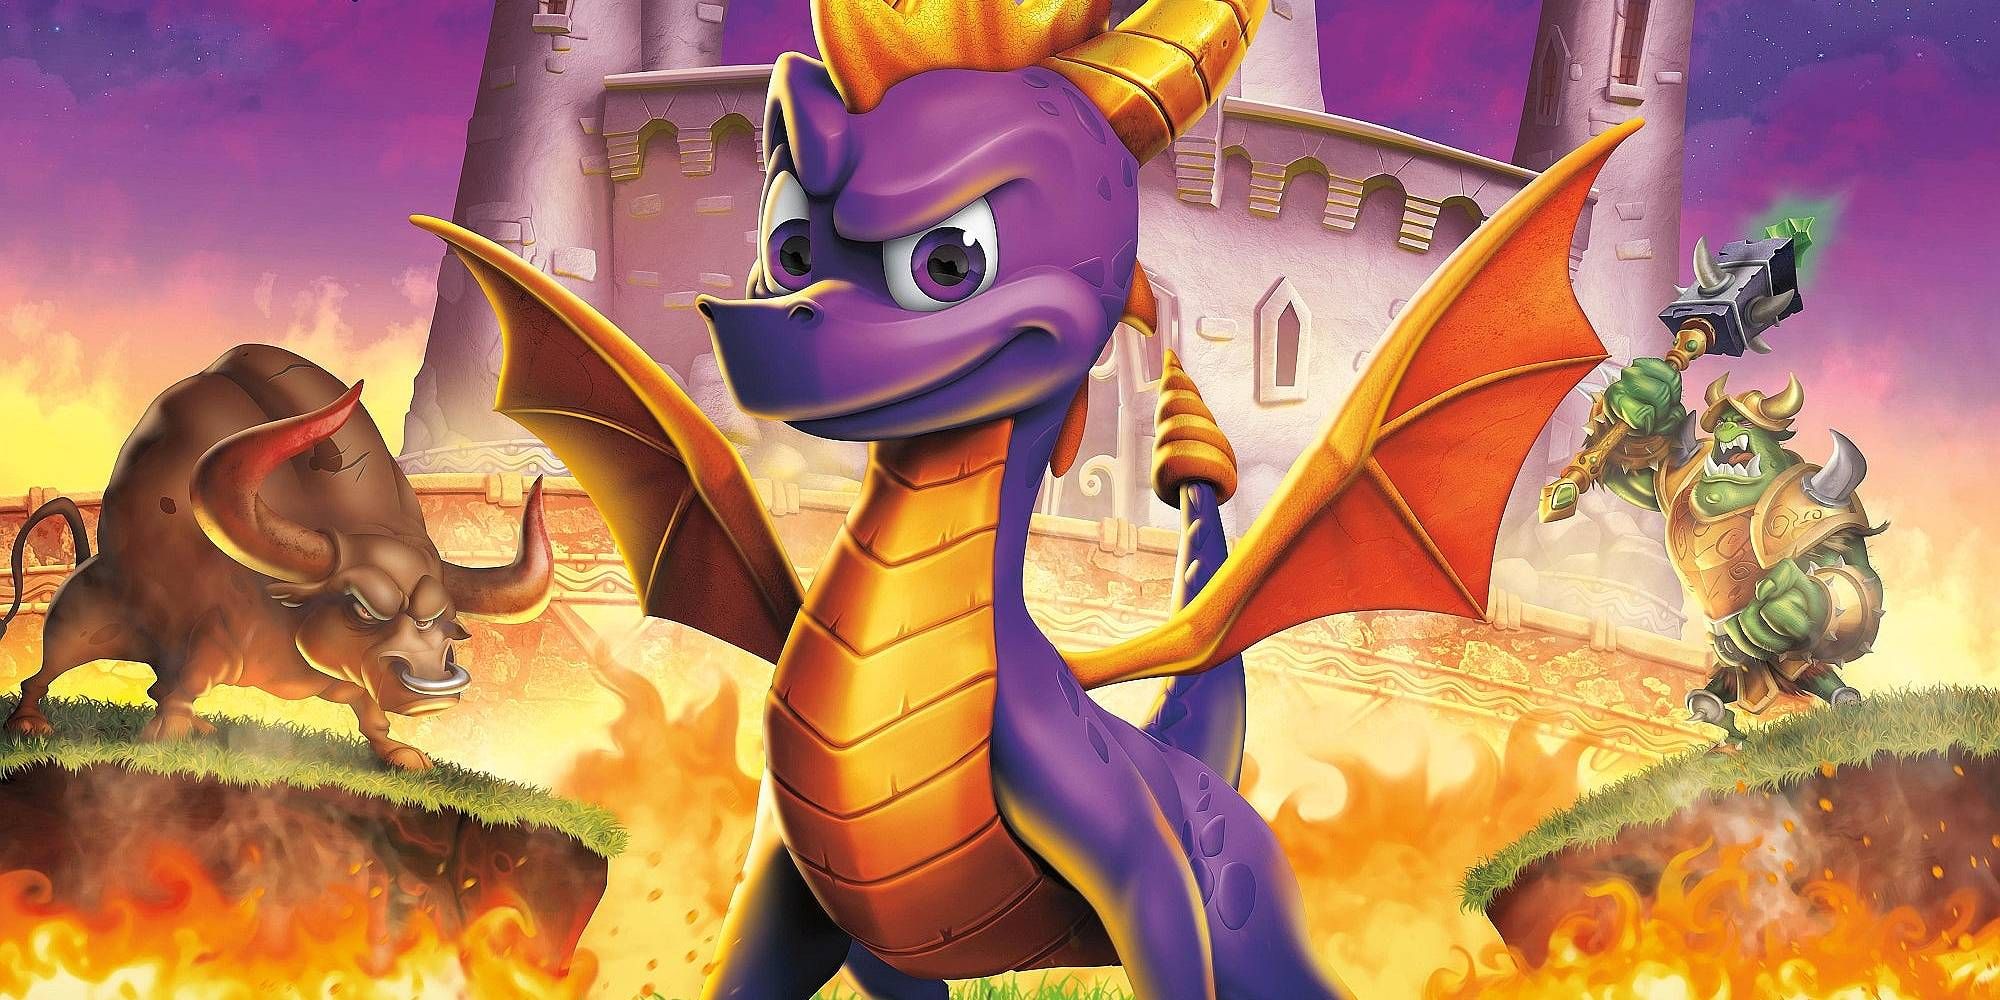 In Spyro the Dragon, a purple dragon stands in front of a fiery environment, behind which stands a bull and an armored orc.